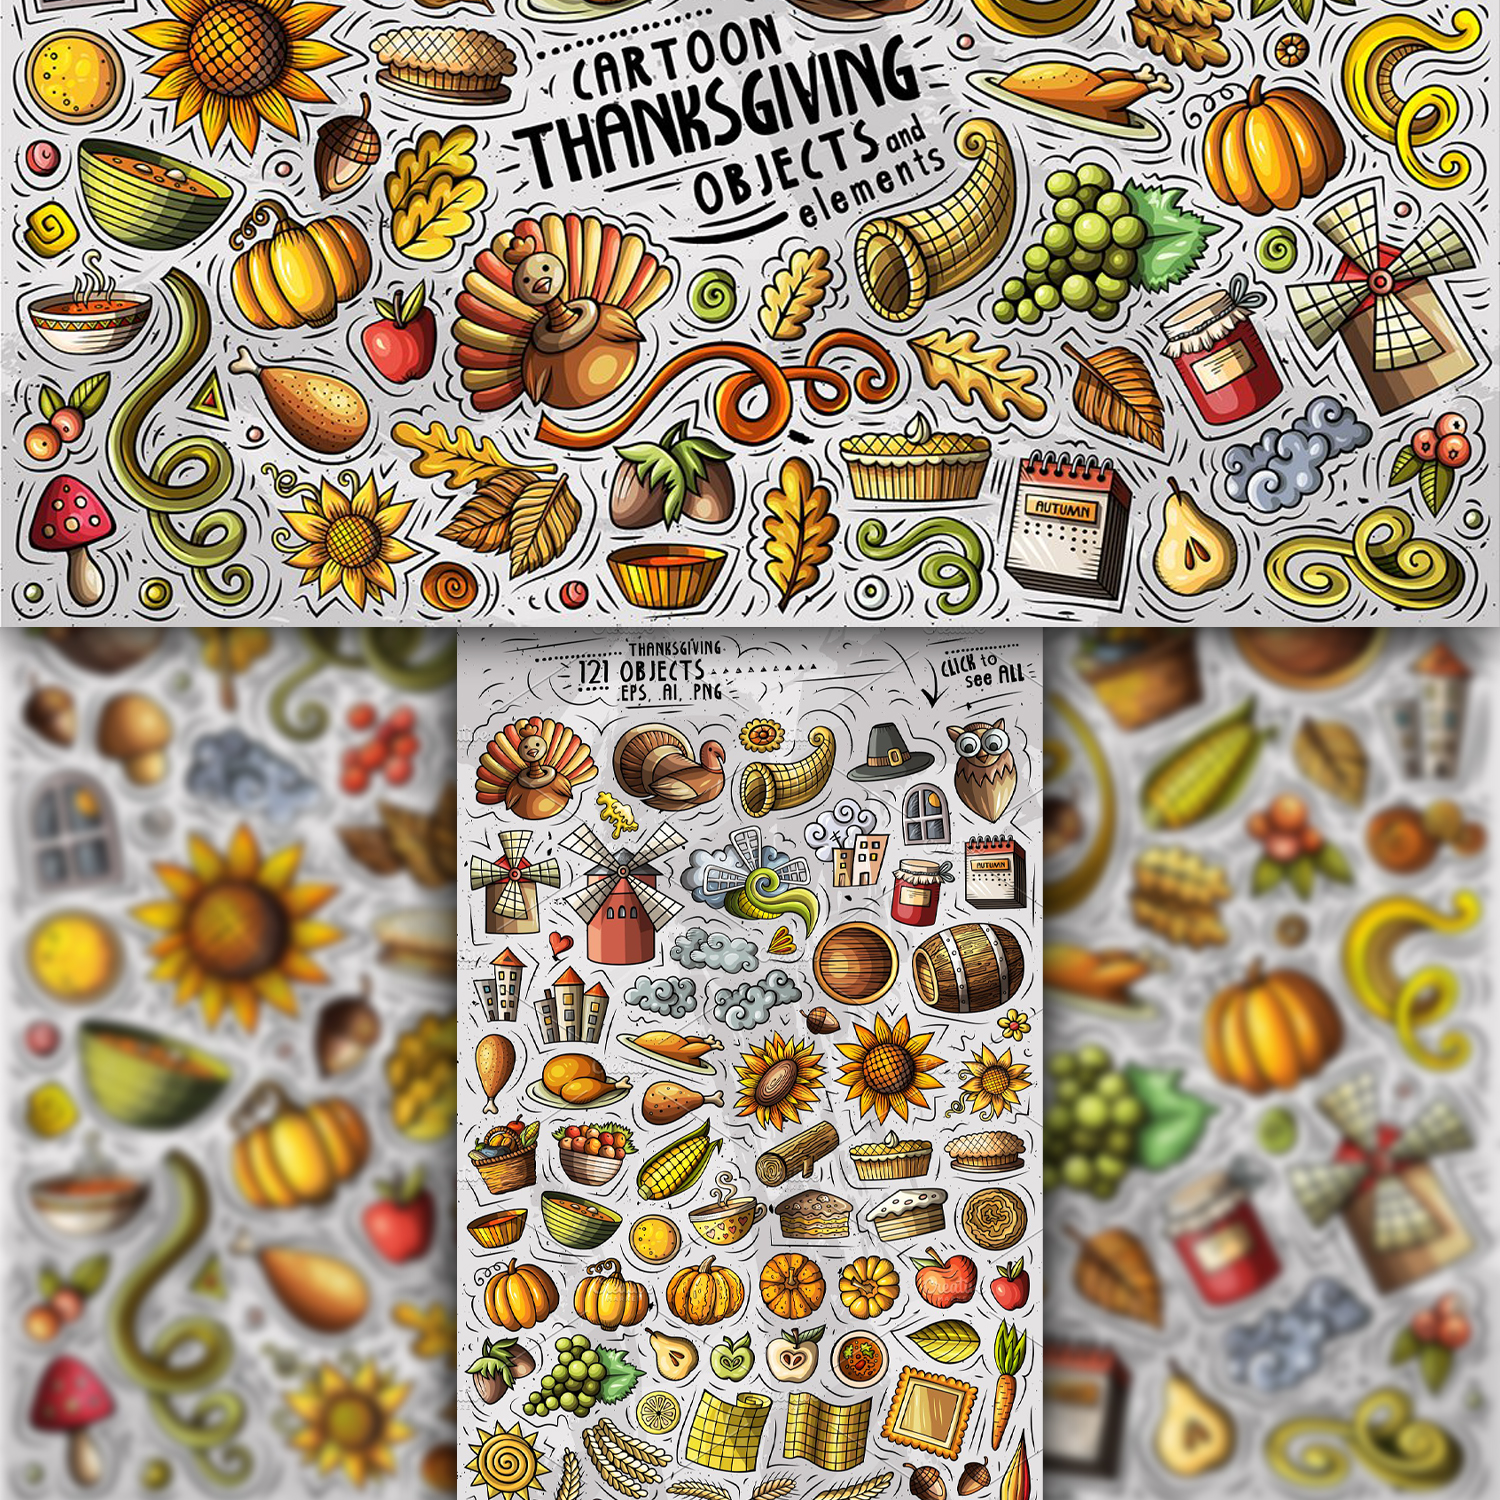 Submission of prints on the theme of Thanksgiving.